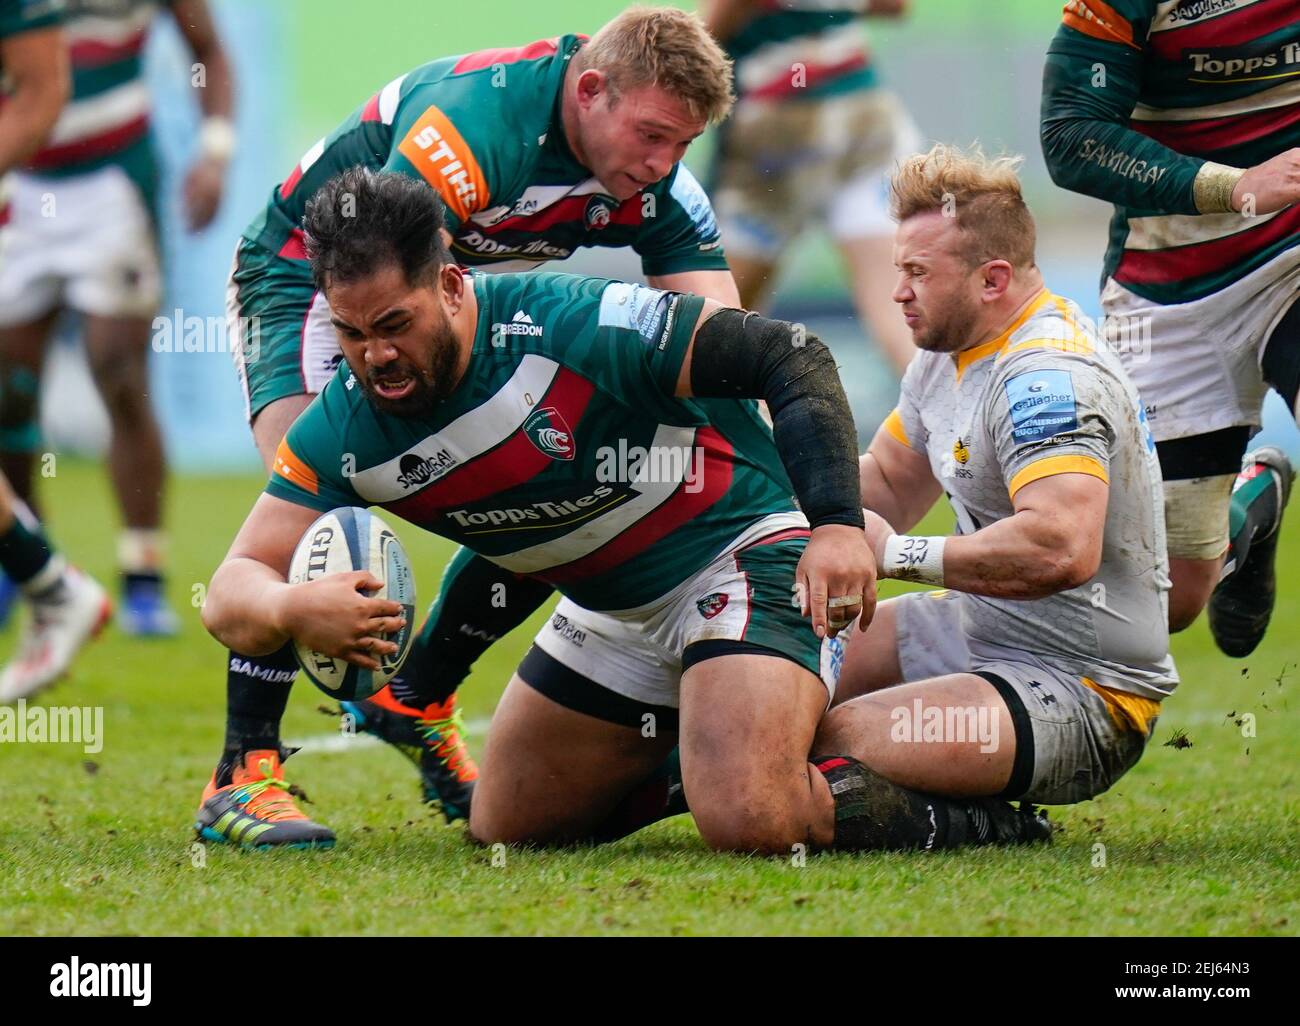 Leicester Tigers Nephi Leatigaga is tackled by Wasps Hooker Tom Cruse during a Gallagher Premiership Round 10 Rugby Union match, Friday, Feb